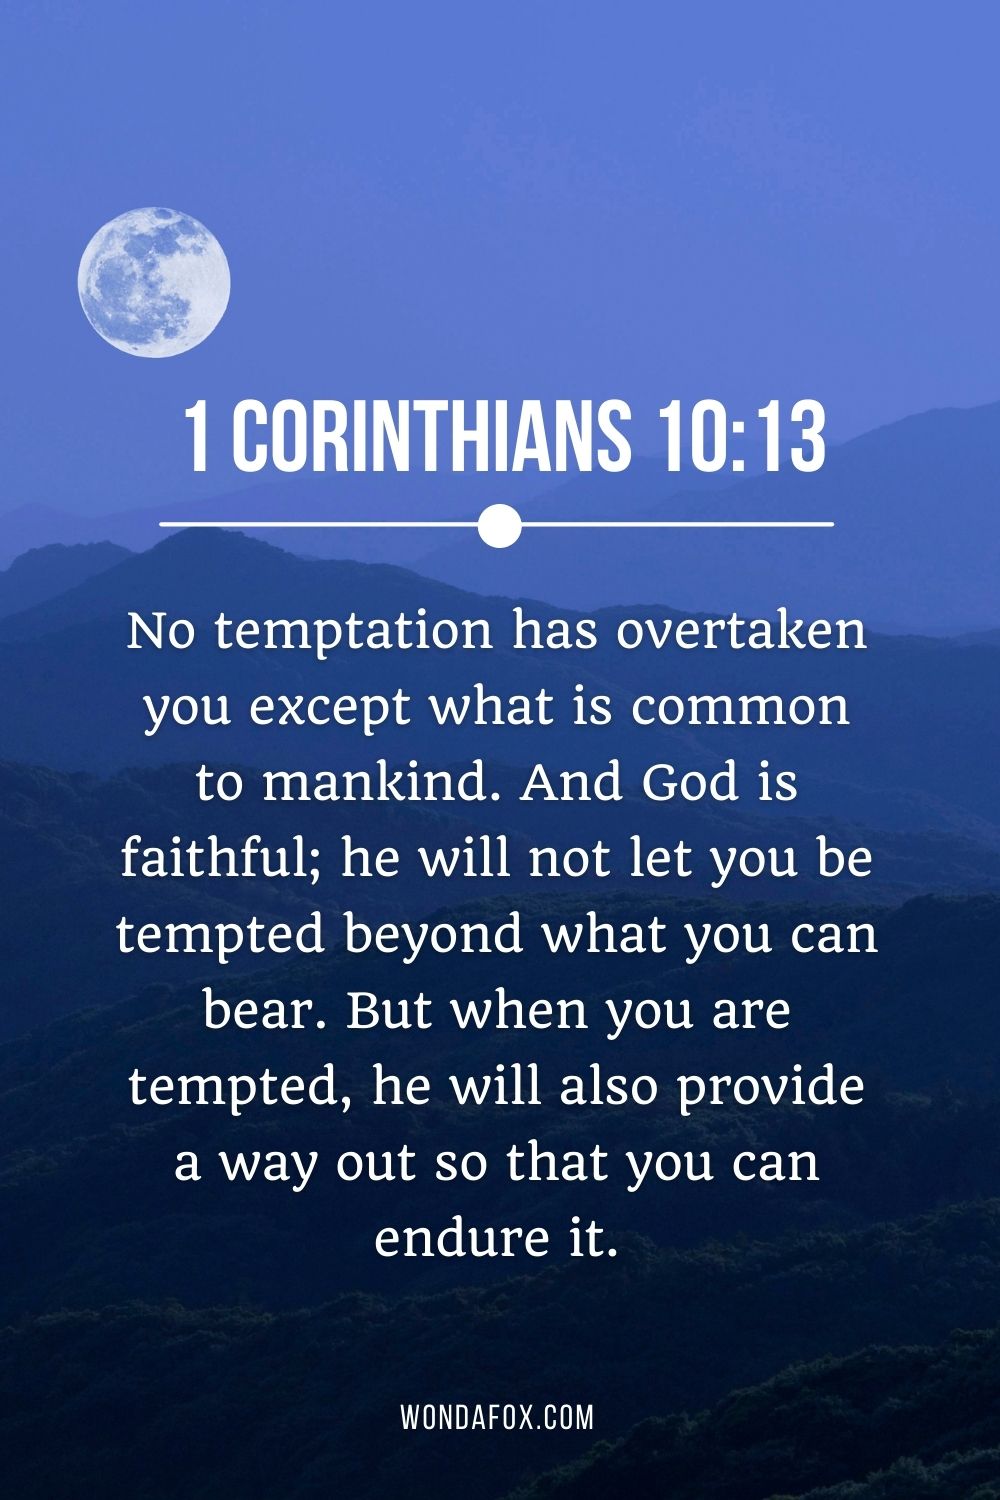  No temptation has overtaken you except what is common to mankind. And God is faithful; he will not let you be tempted beyond what you can bear. But when you are tempted, he will also provide a way out so that you can endure it.